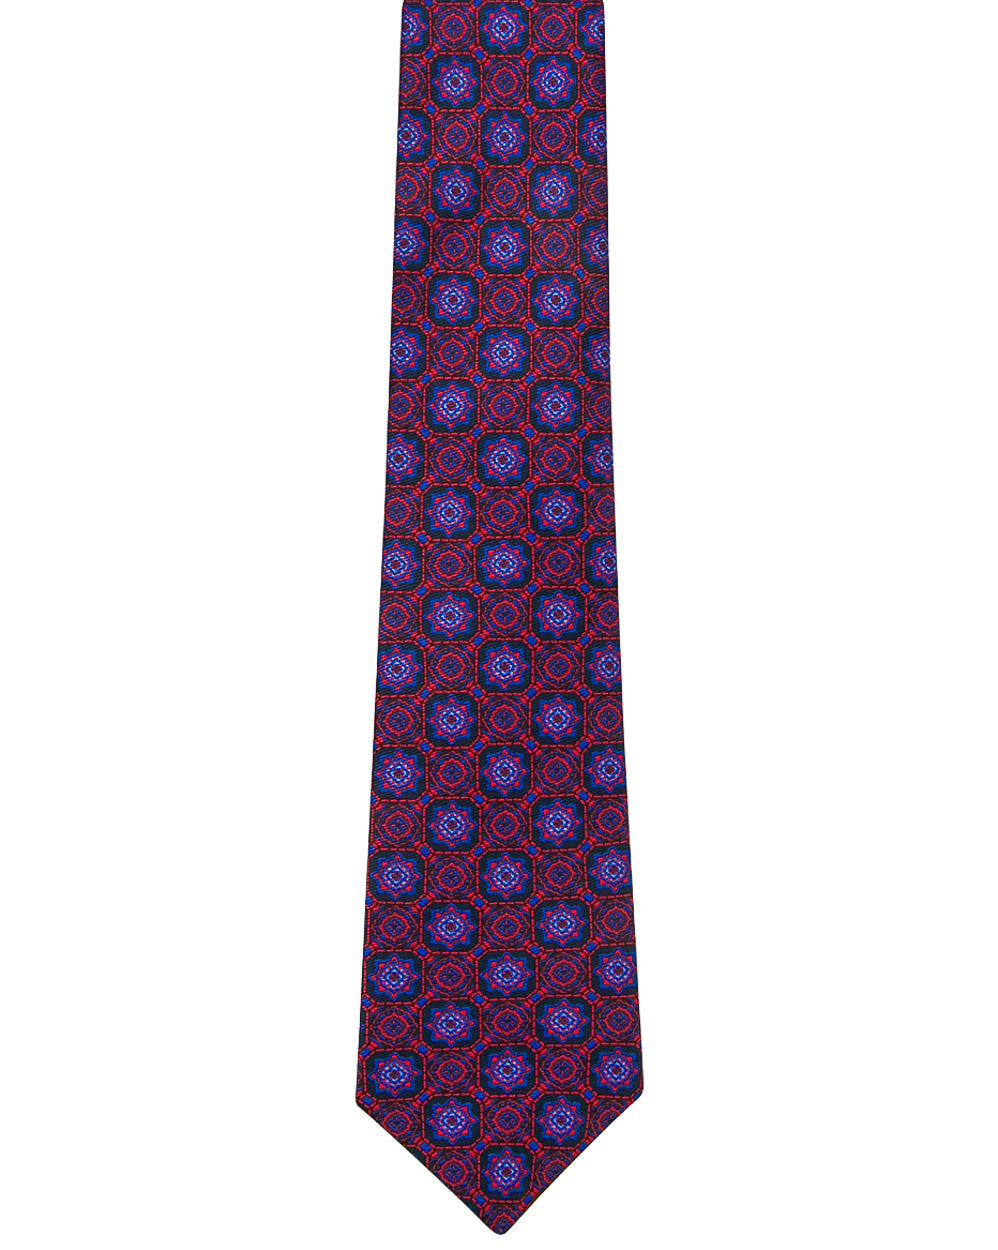 Red and Blue Medallion Tie